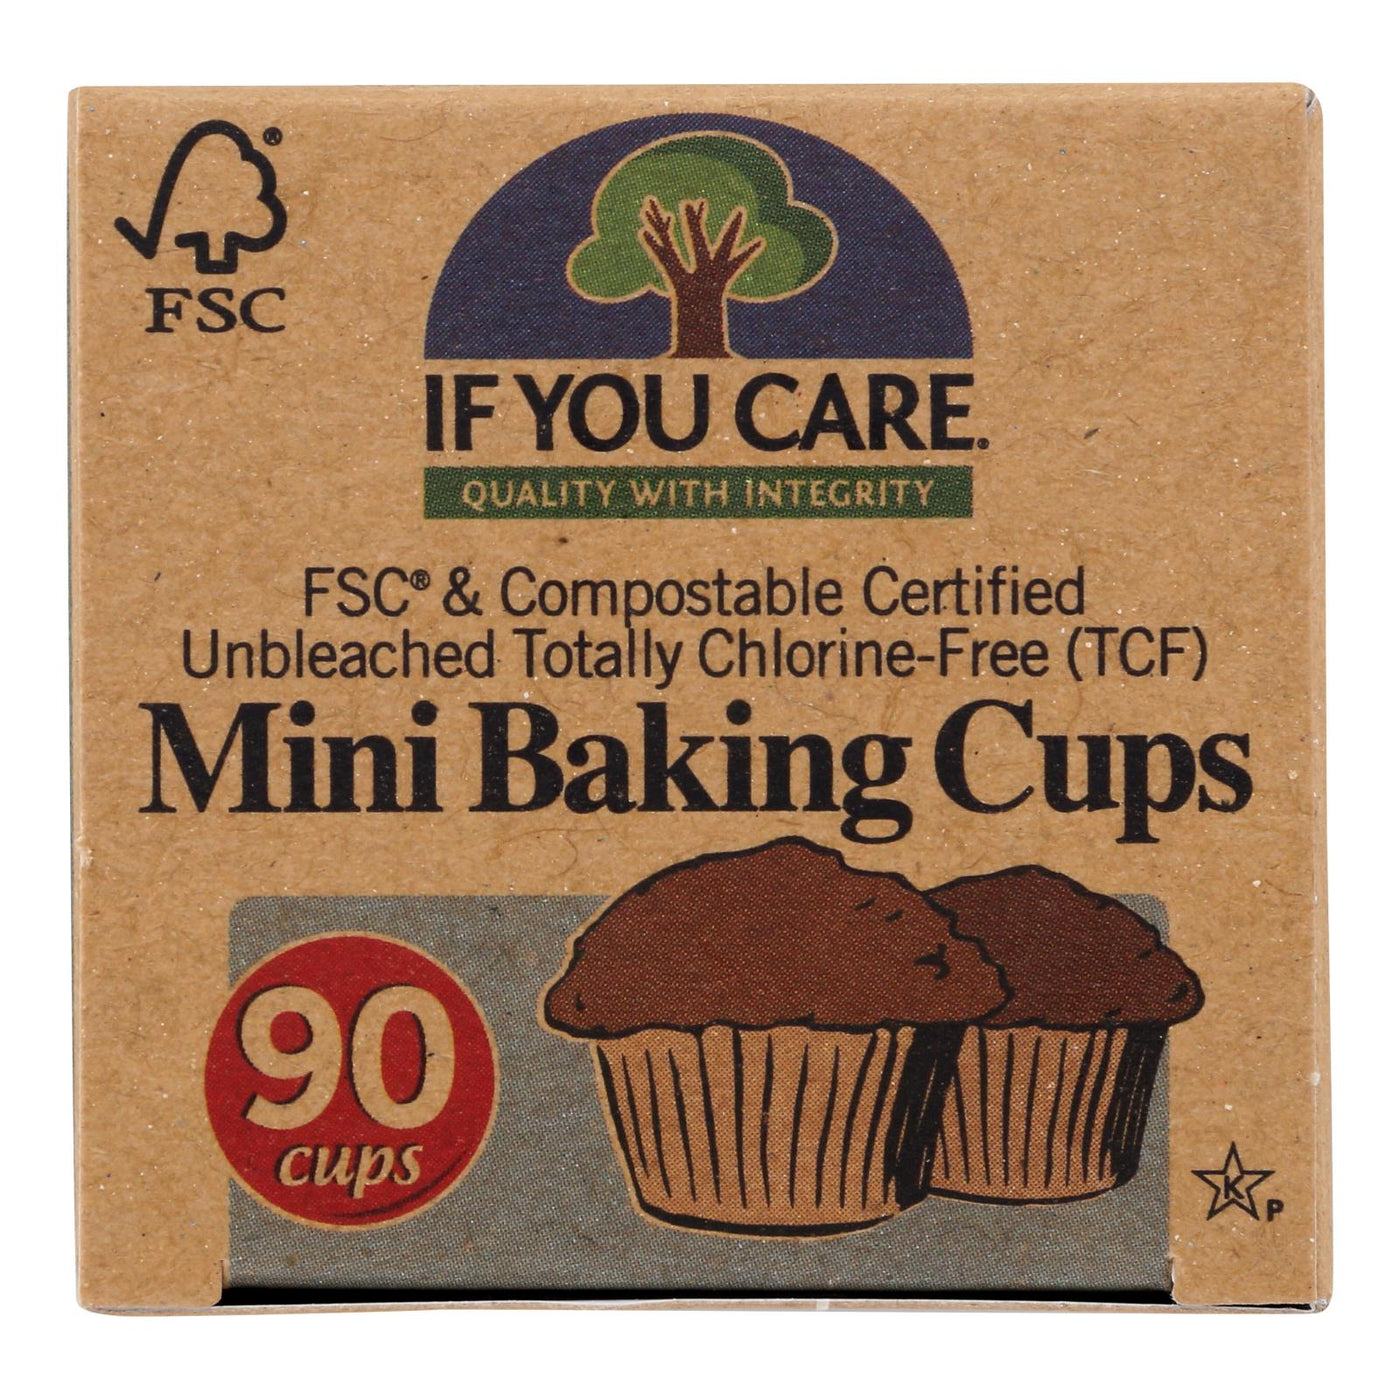 If You Care Baking Cups - Mini Cup - Case Of 24 - 90 Count | OnlyNaturals.us